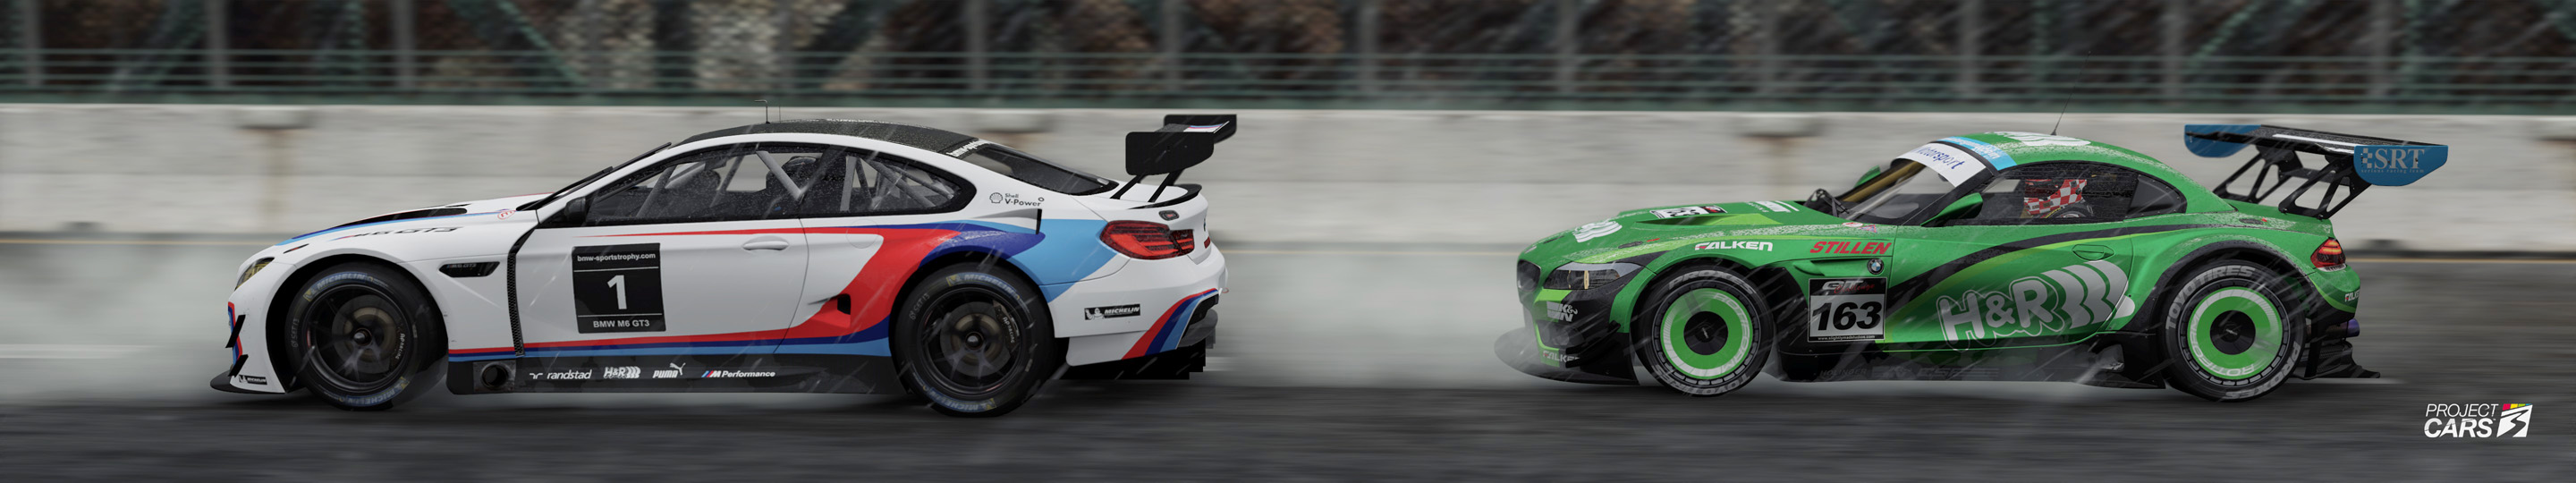 1 PROJECT CARS 3 BMW Z4 GT3 at CALI HIGHWAY REVERSE copy.jpg